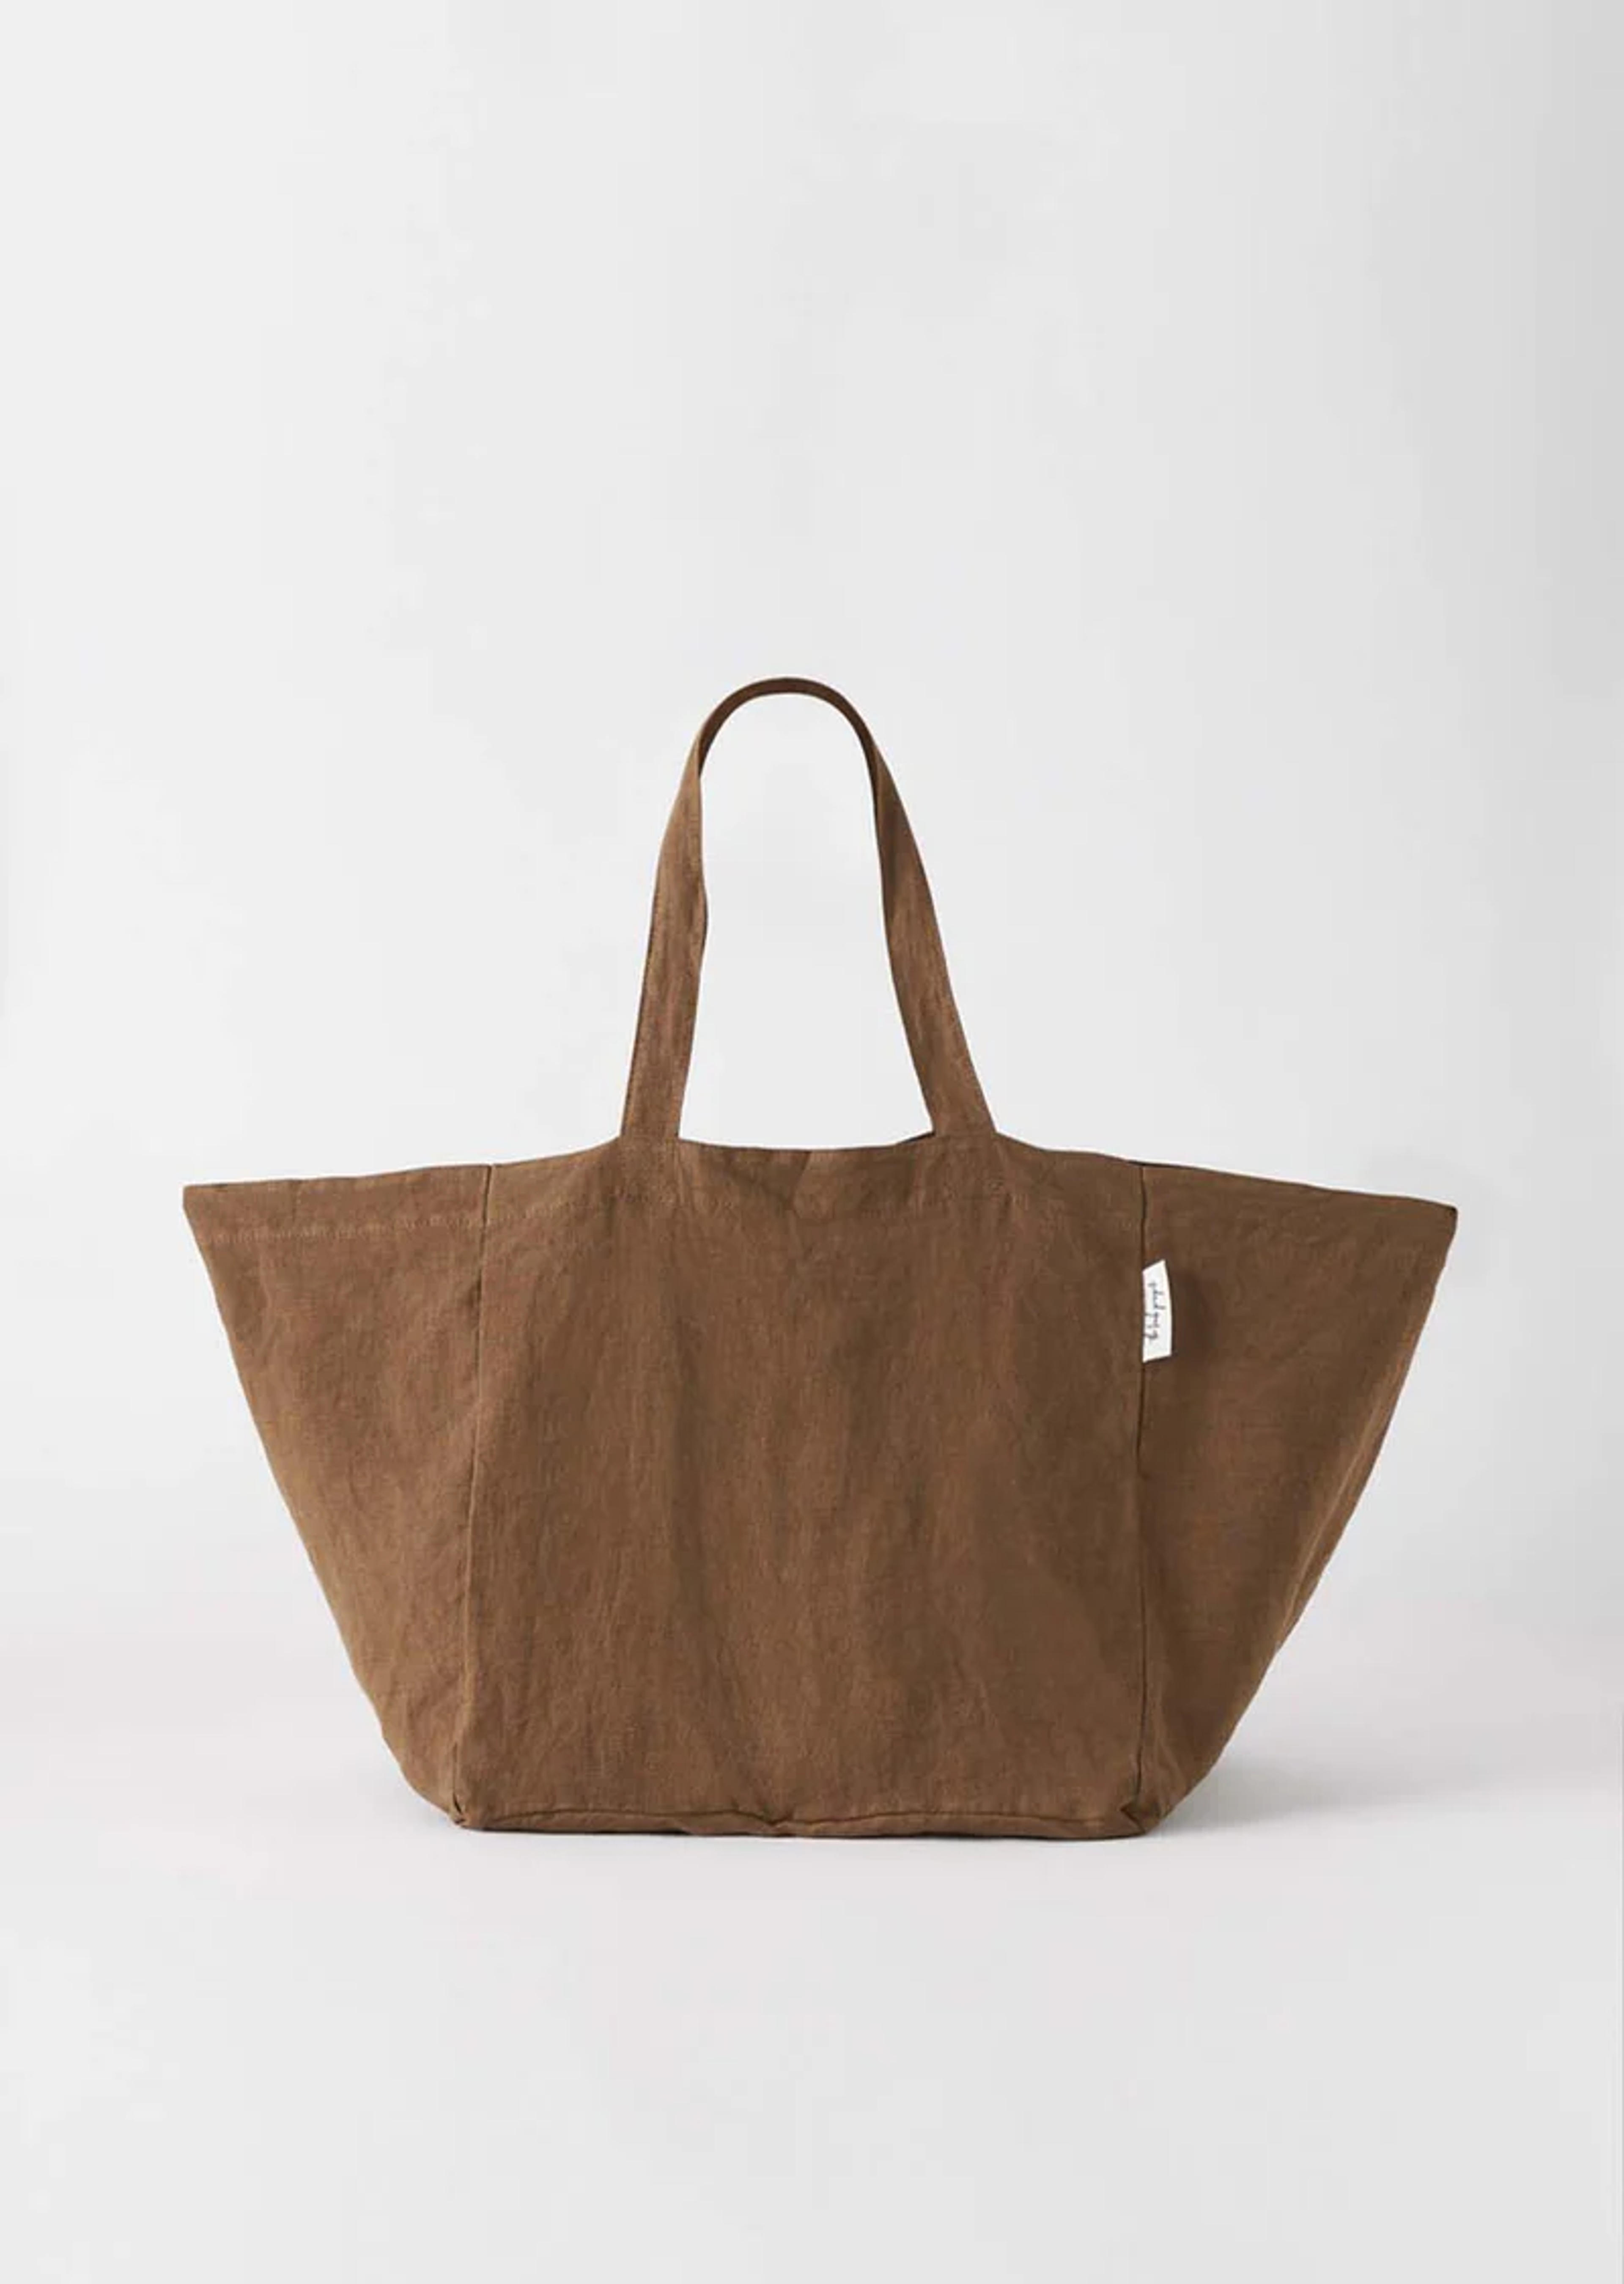 Linen Tote Bag | The Beach People